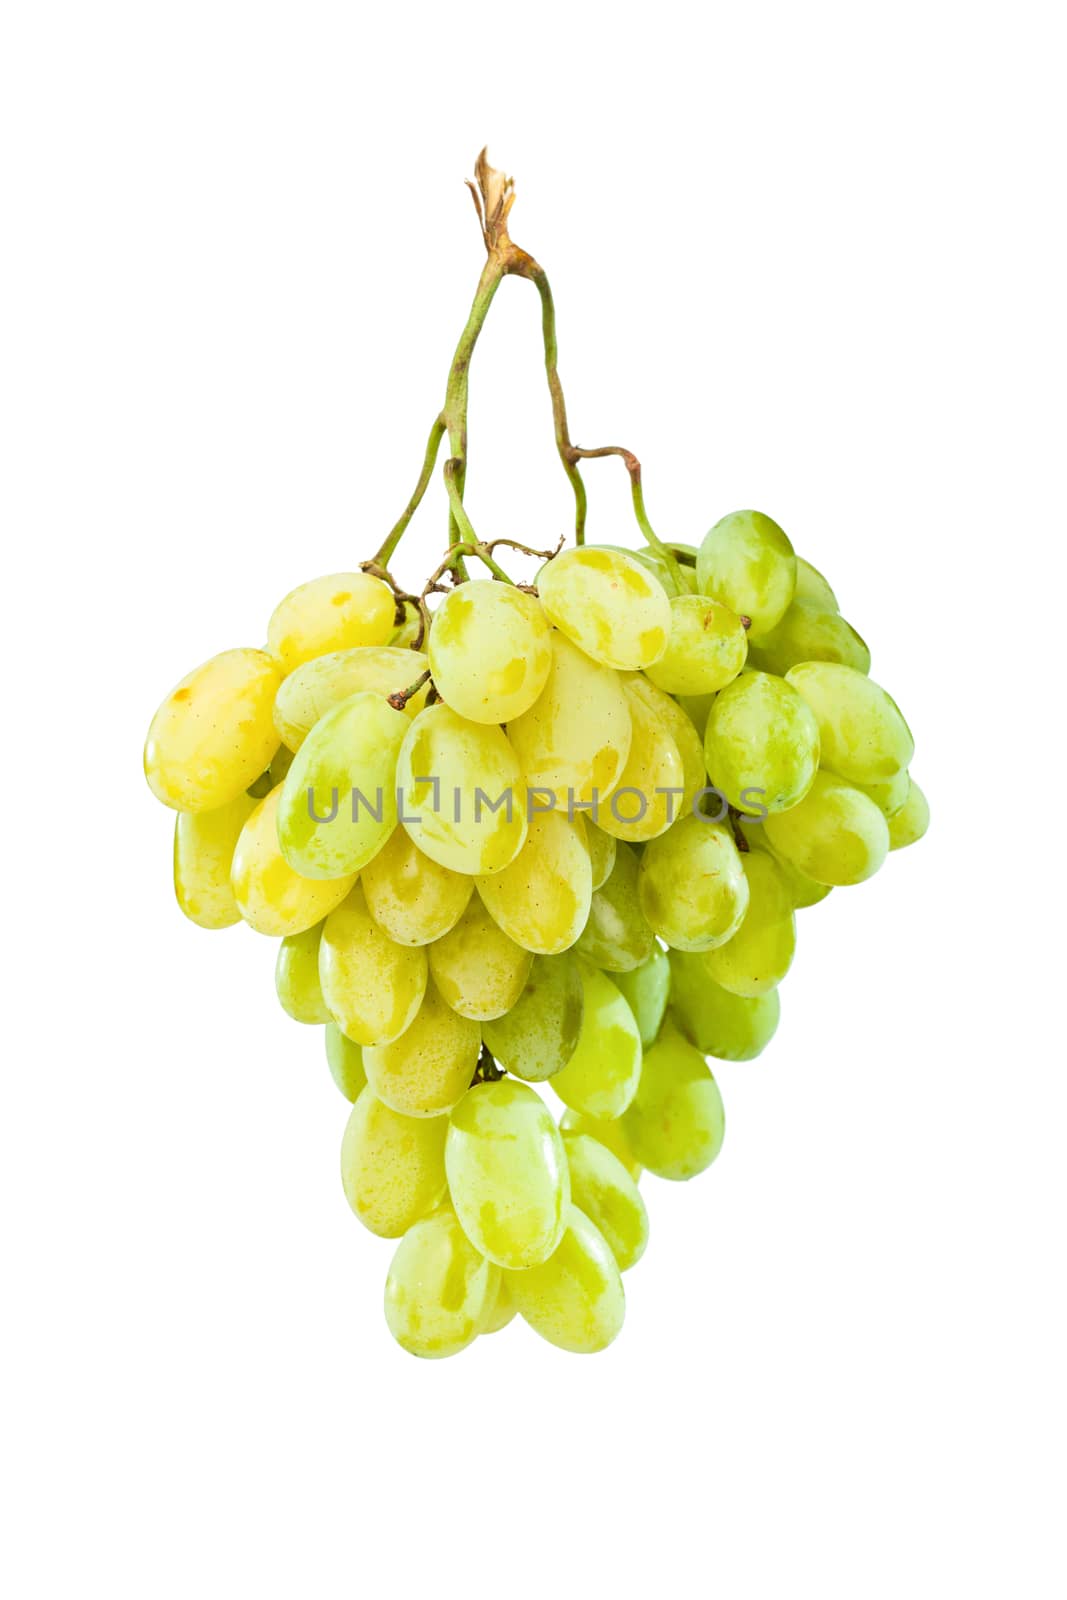 Ripe green grapes hanging against white by kokimk